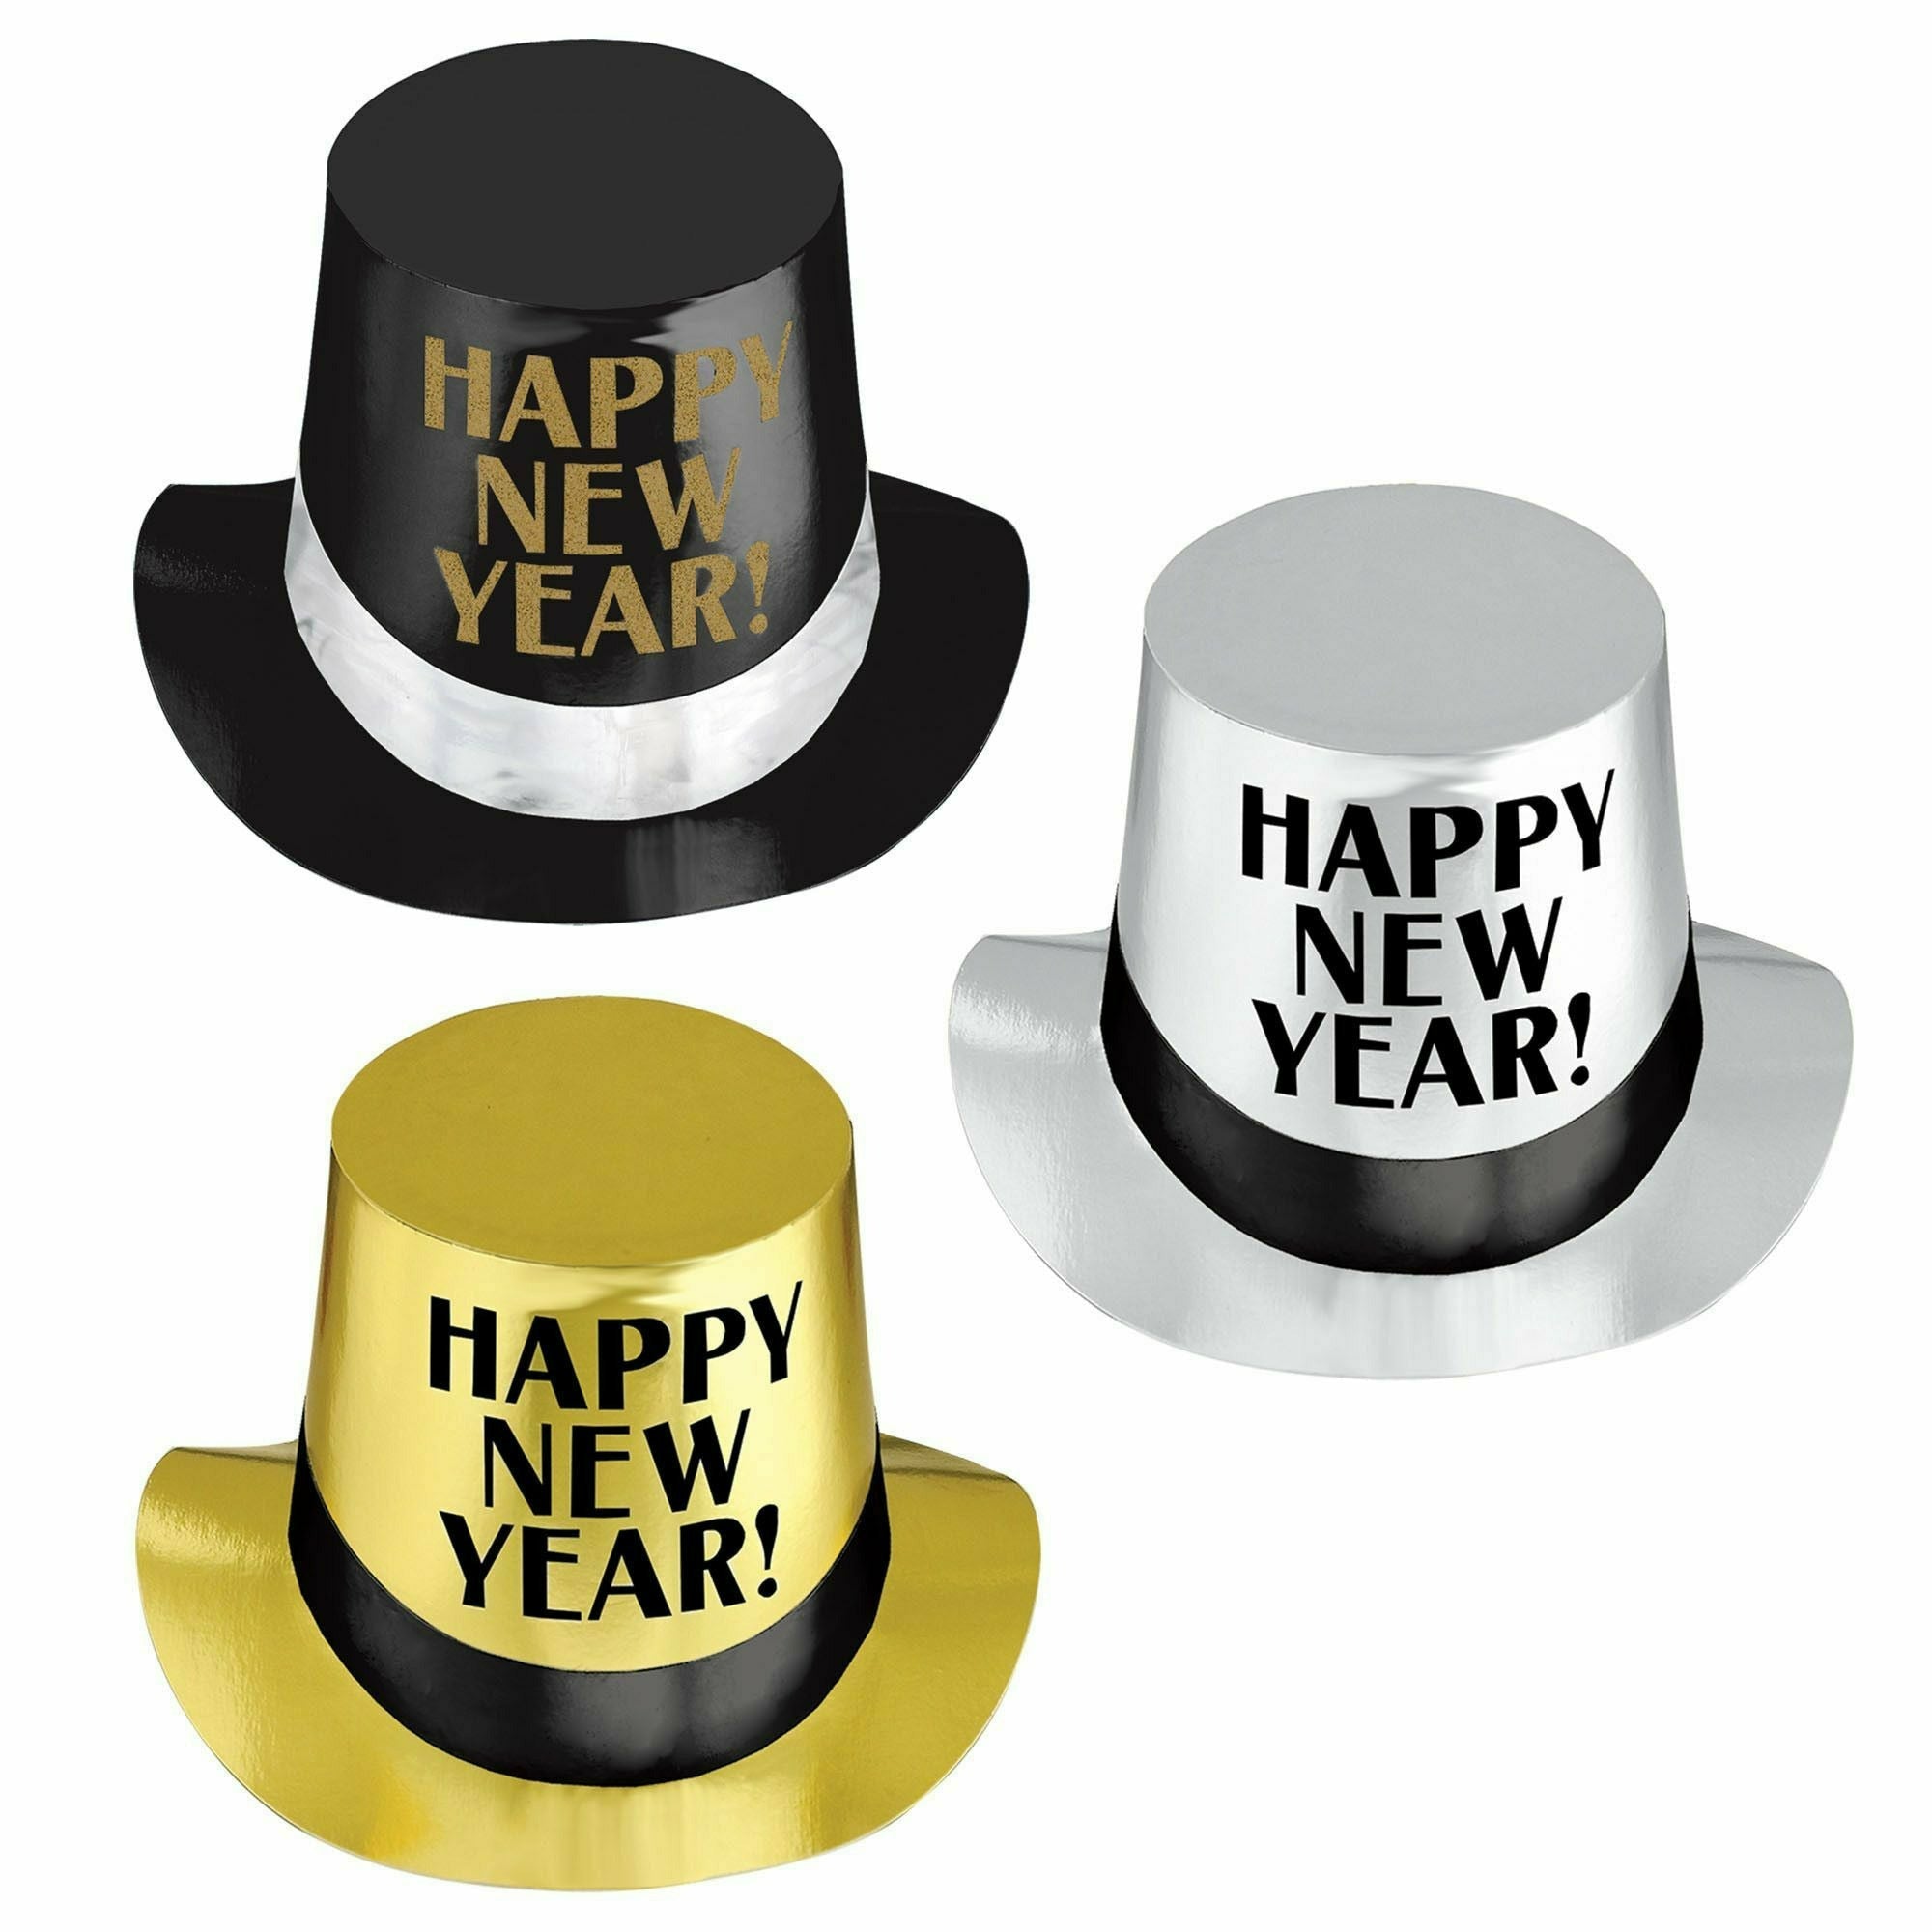 Amscan HOLIDAY: NEW YEAR'S Happy New Year Thick Paper Hats - Black, Silver & Gold